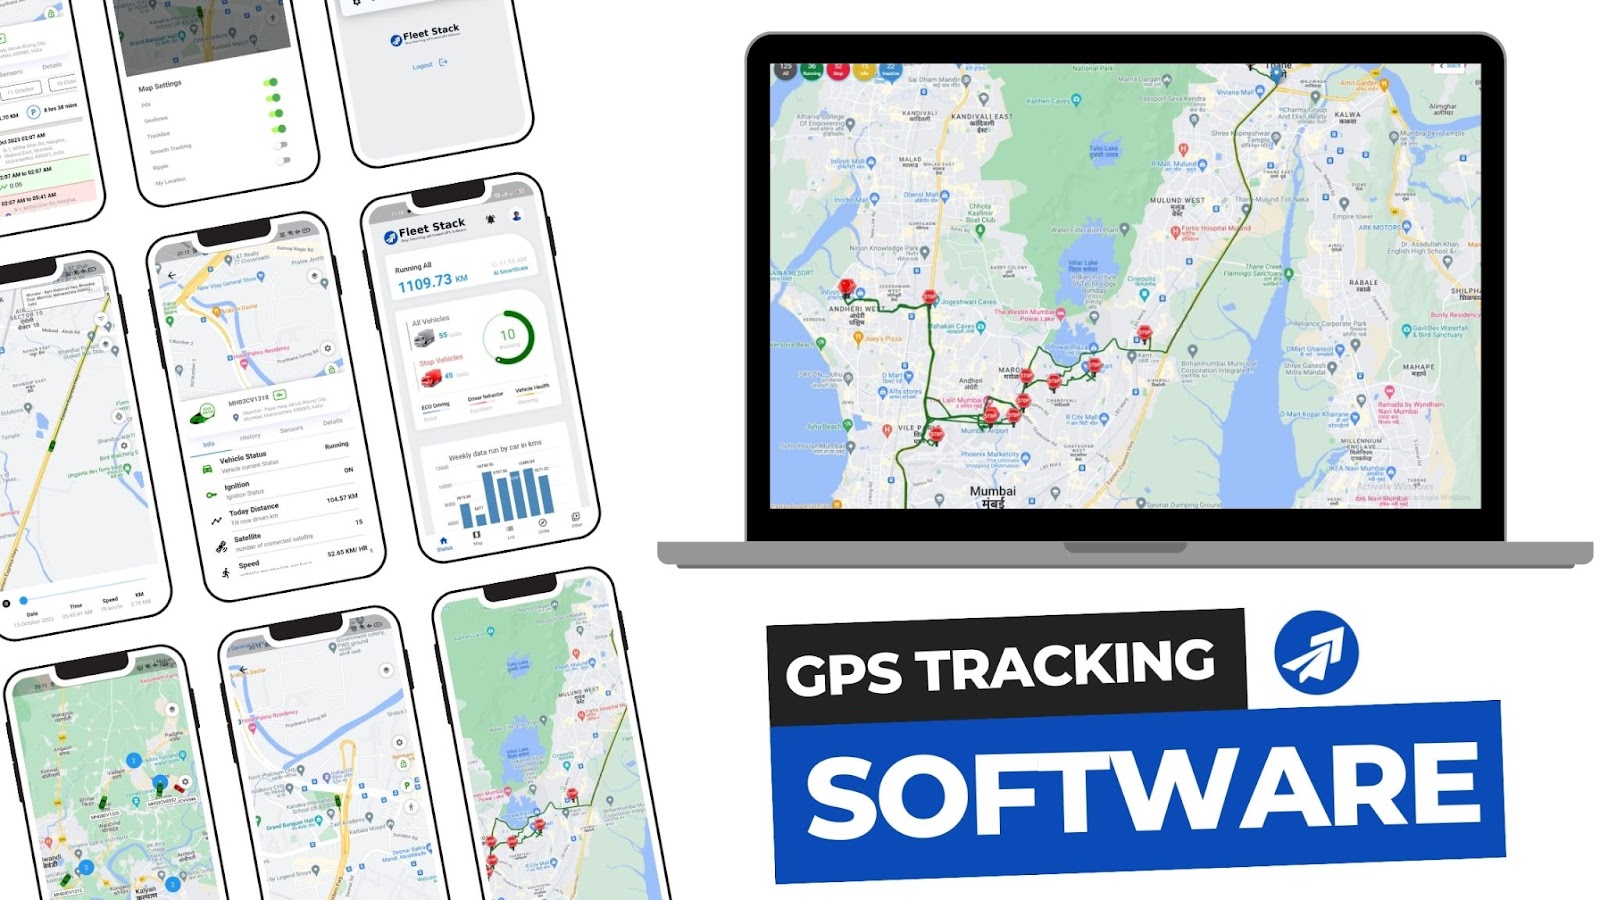 What Exactly is GPS Tracking Software?